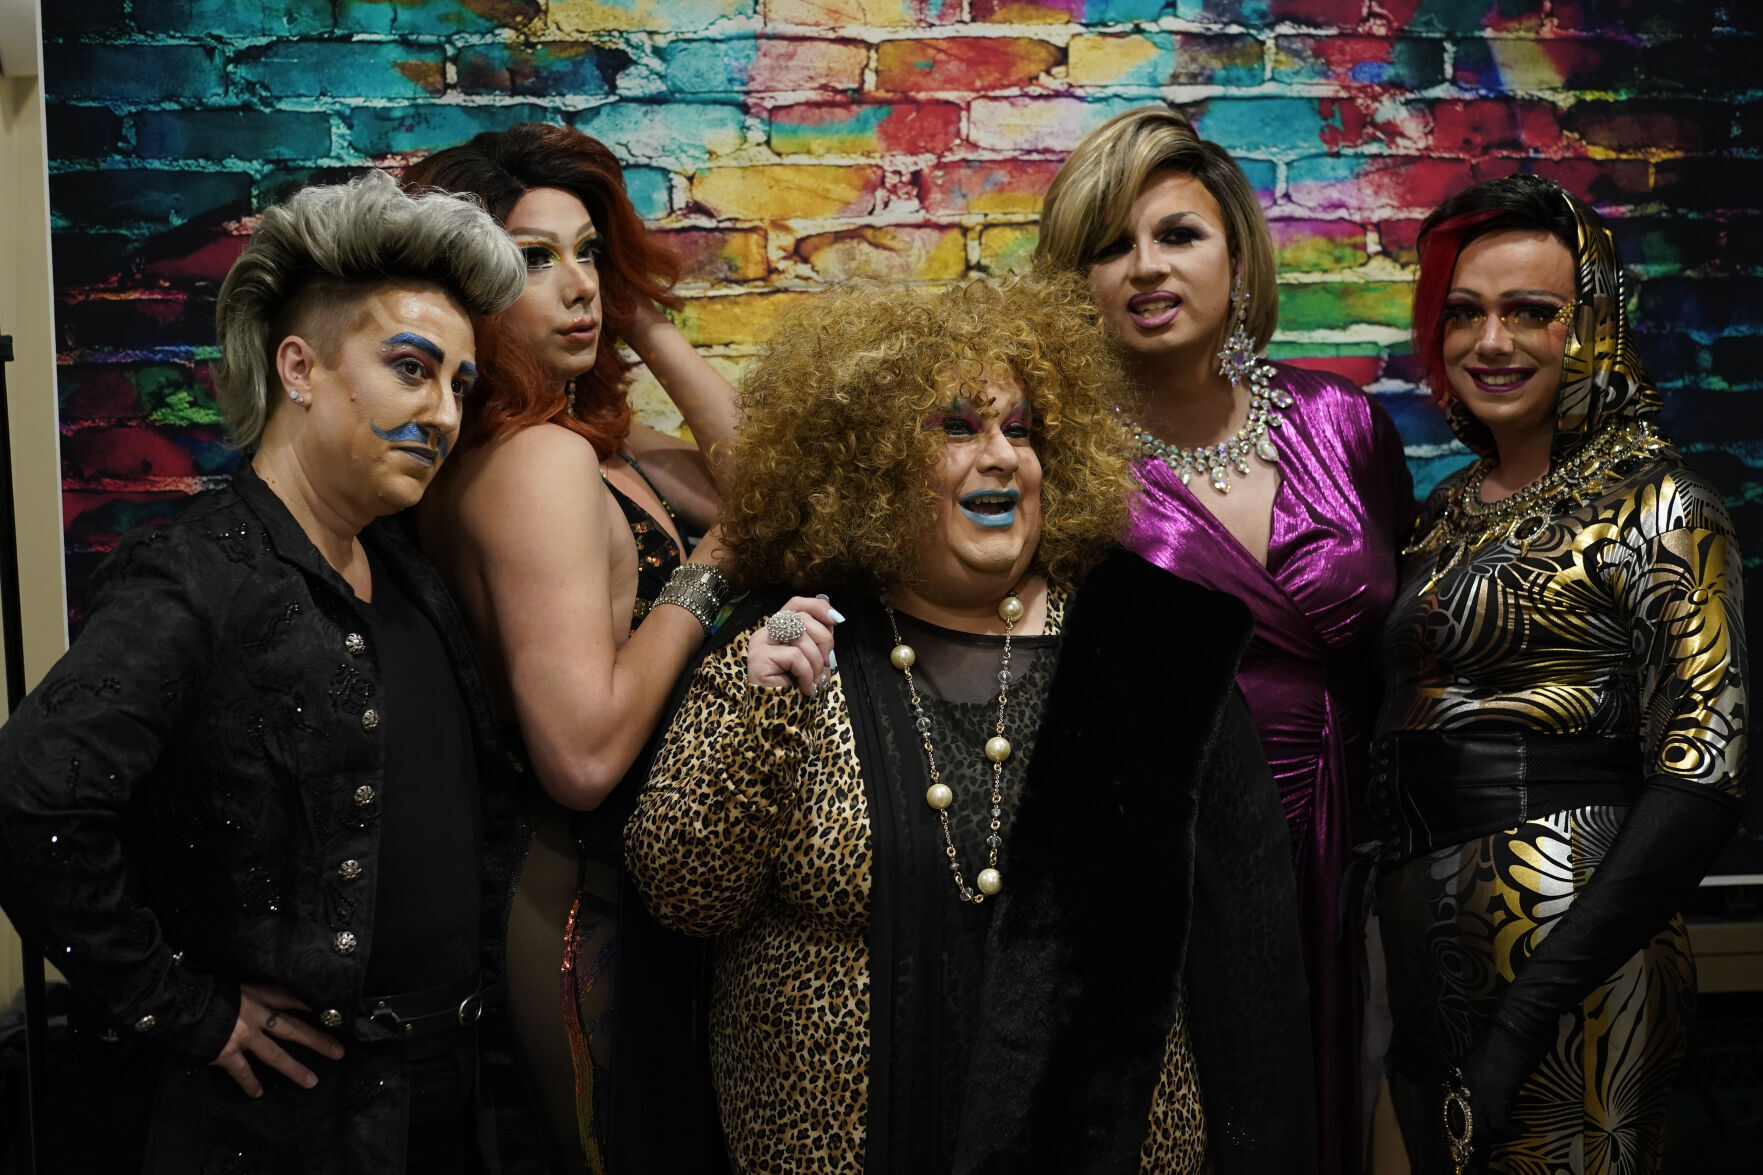 Drag queens are proud and loud in coal towns